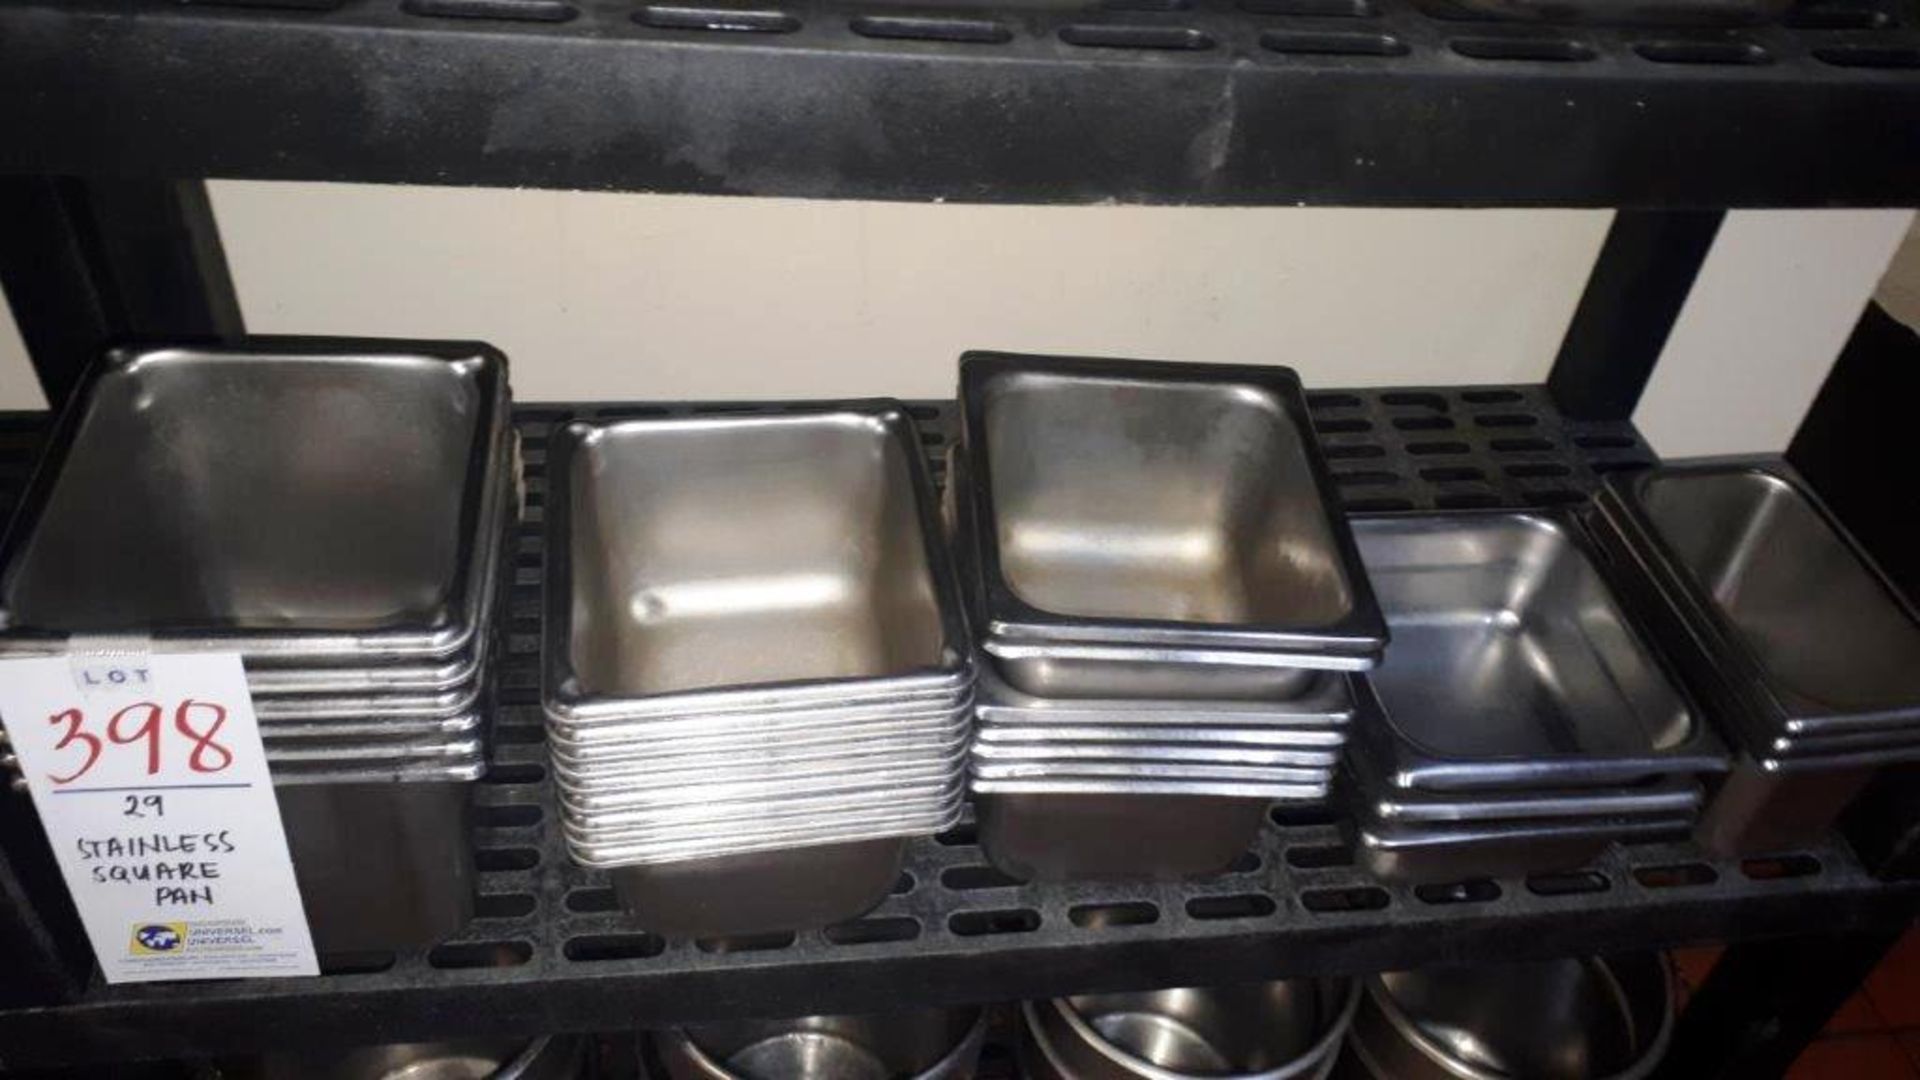 Stainless square pans